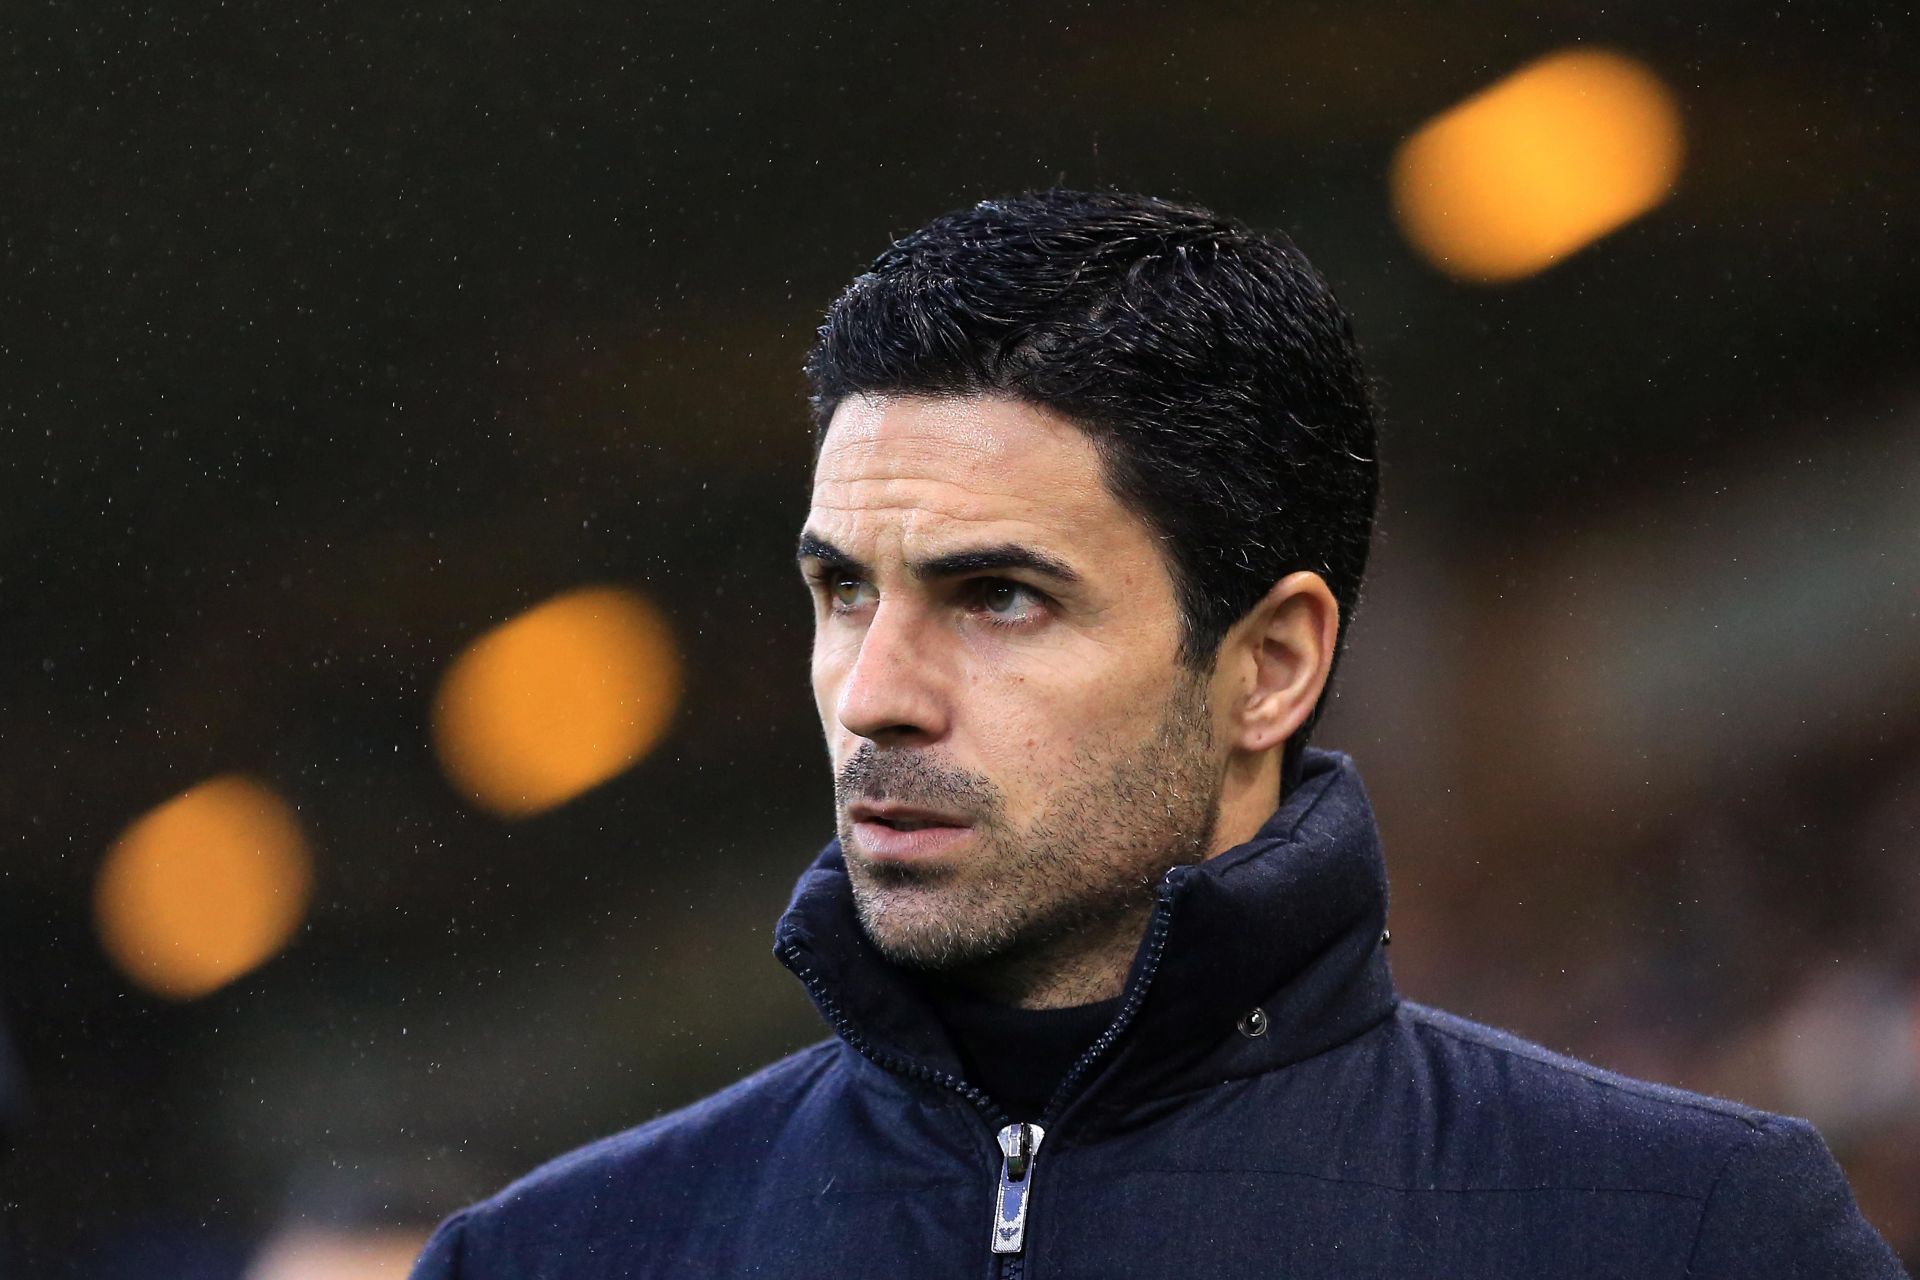 Arsenal manager Mikel Arteta is in a tight spot after consecutive league defeats.